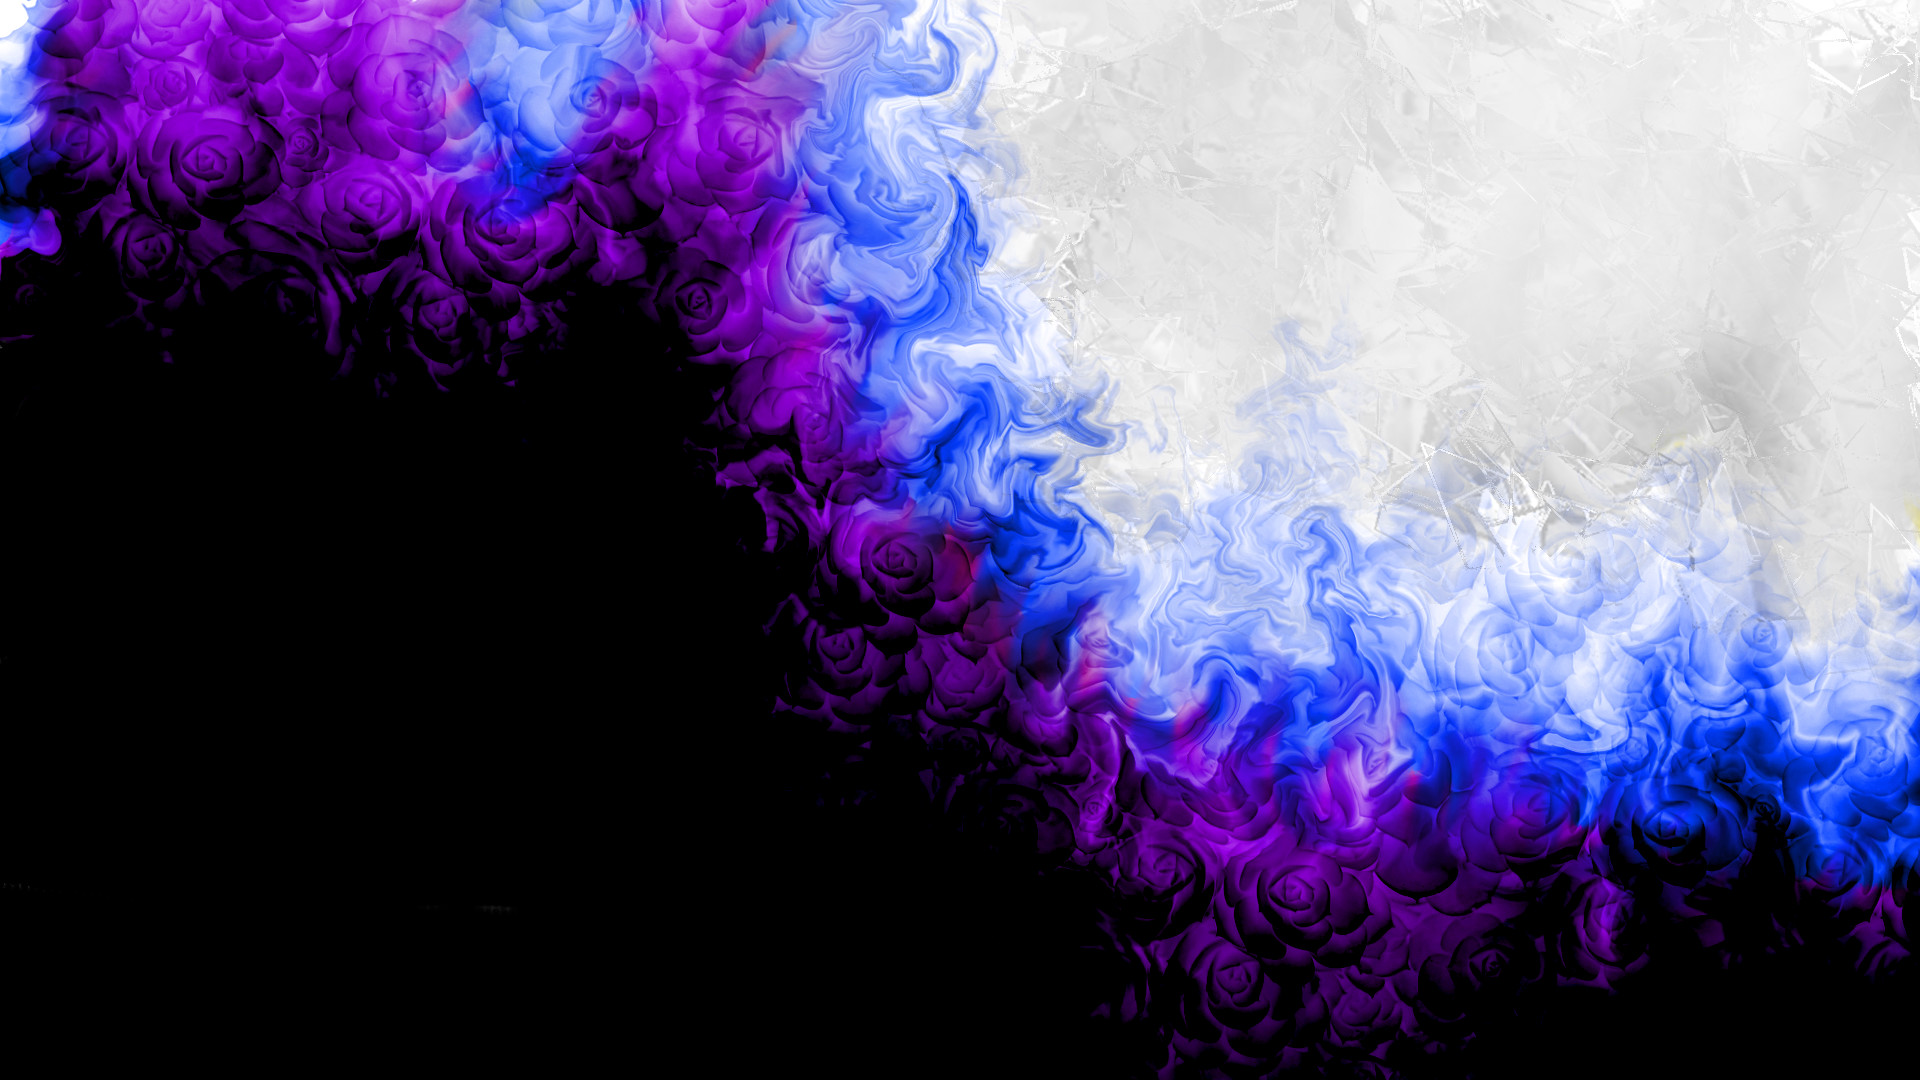 1920x1080 Purple roses with blue fire